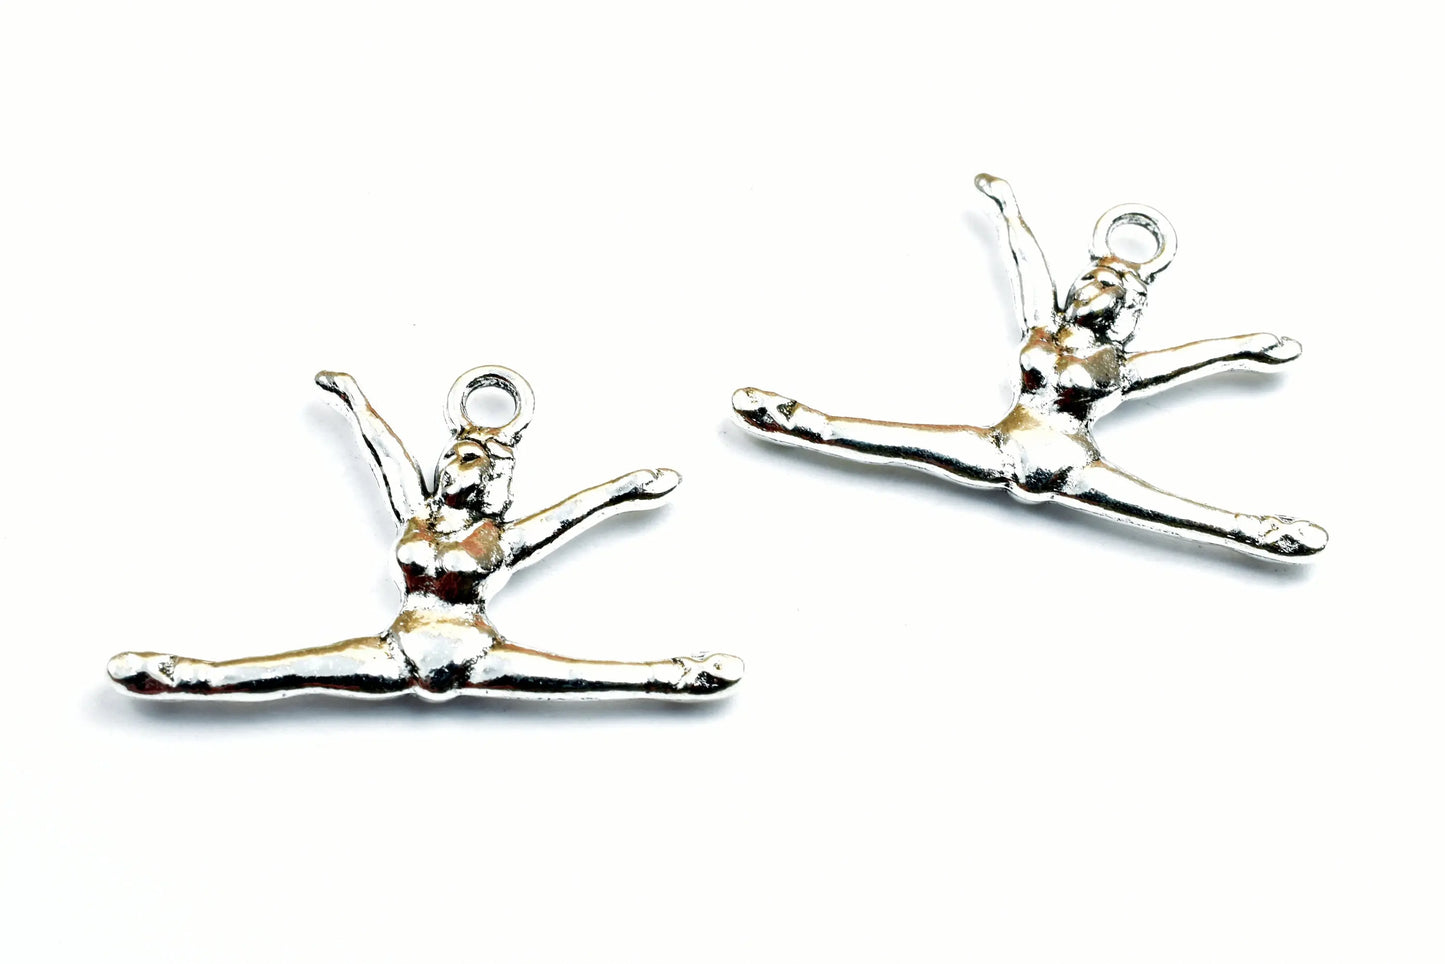 8PCs Gymnastics Player Sport Charm Size 16x27mm Antique Tibetan Silver Tone Charm Pendant Finding For Jewelry Making - BeadsFindingDepot